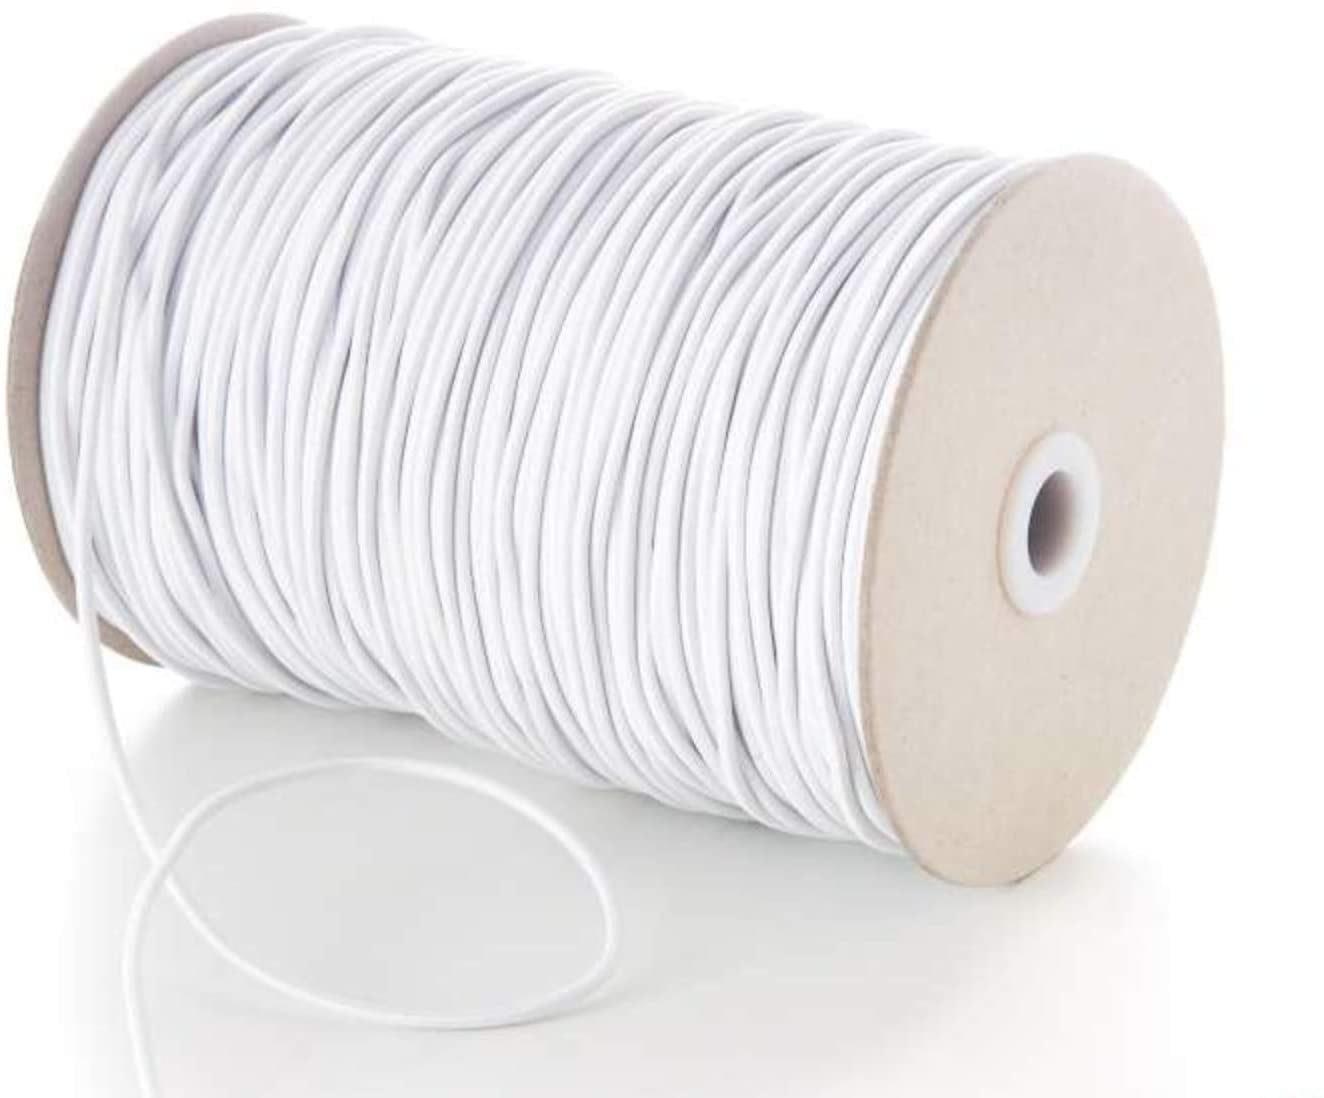 10 Yards Of Doll Stringing Elastic Bungee Cord 3MM 8" to 12” 